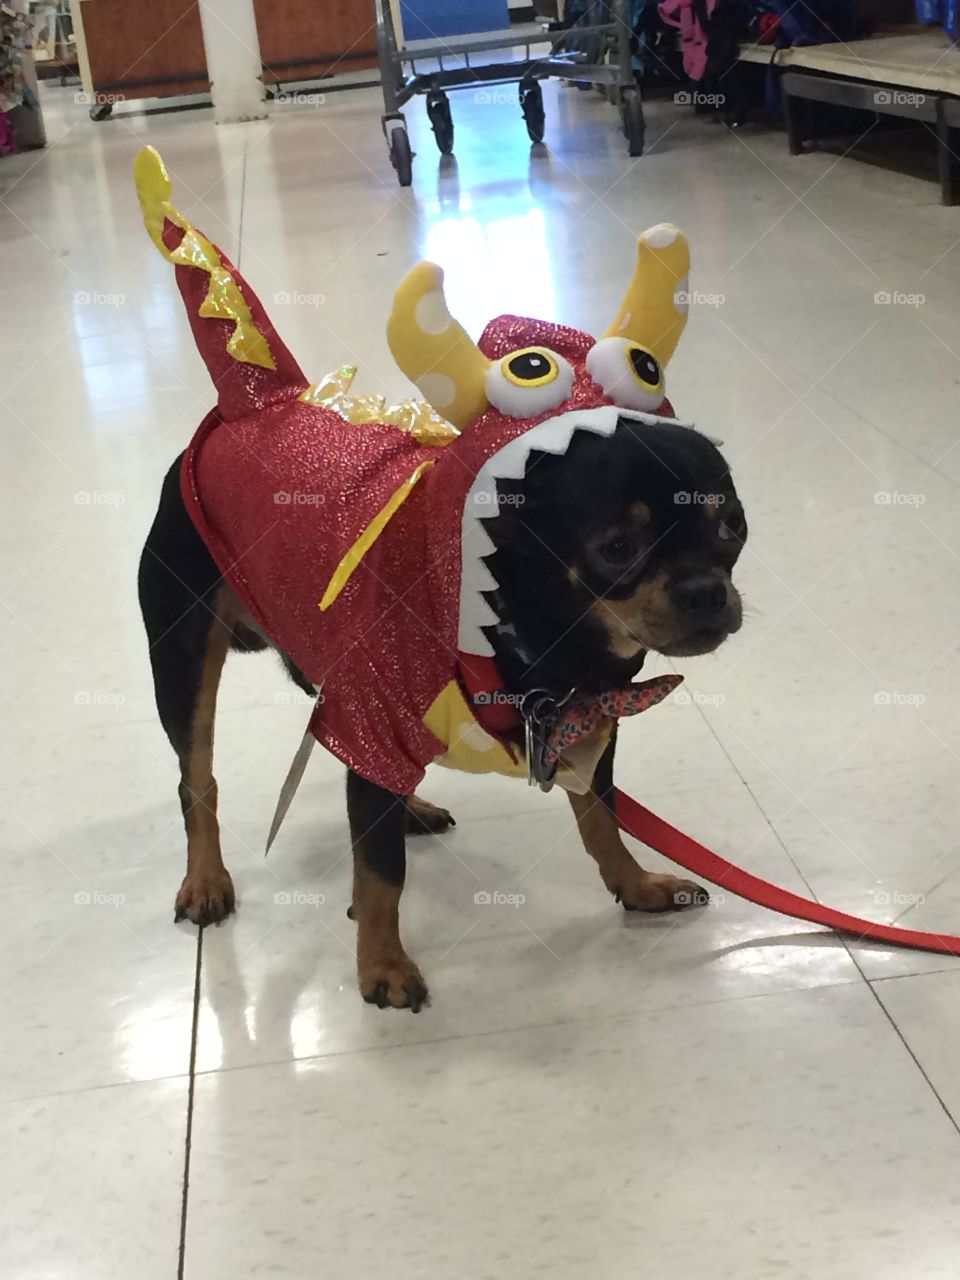 Littlest Dragon. Chihuahua dog in a dragon costume.